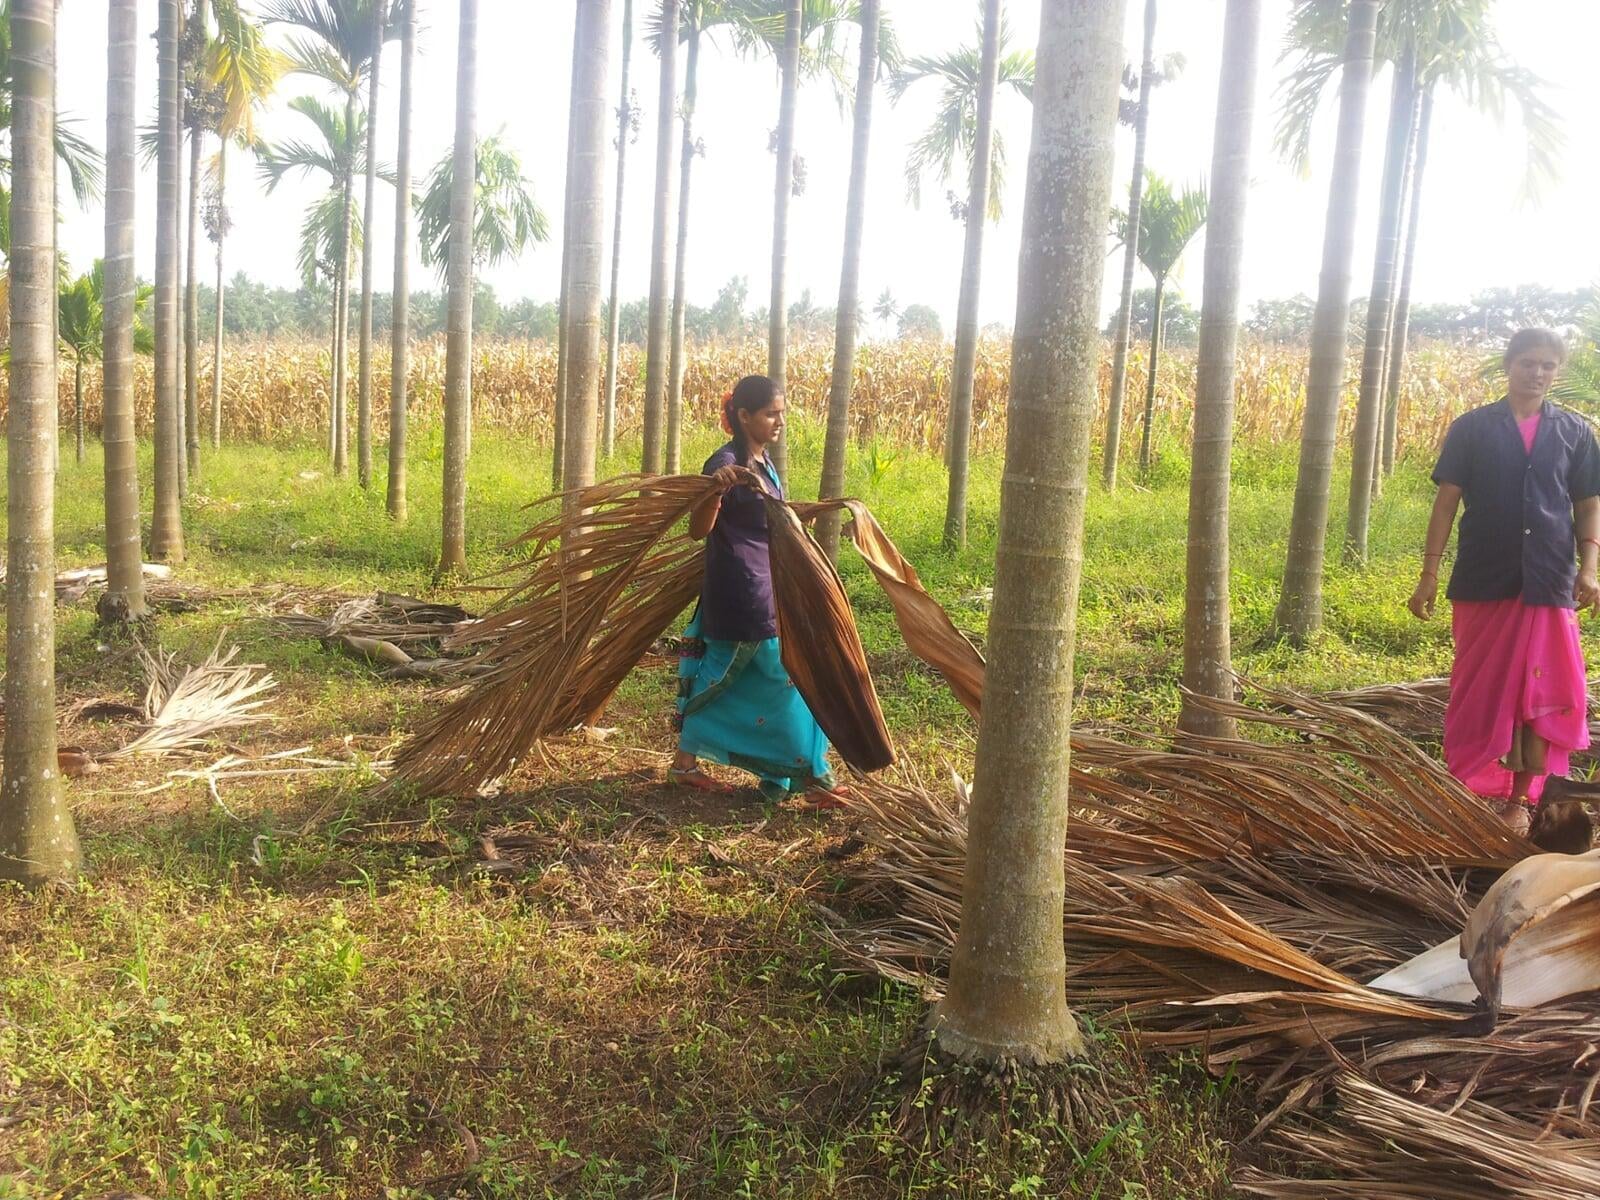 Did you know an areca palm plantation can have over 500 trees?